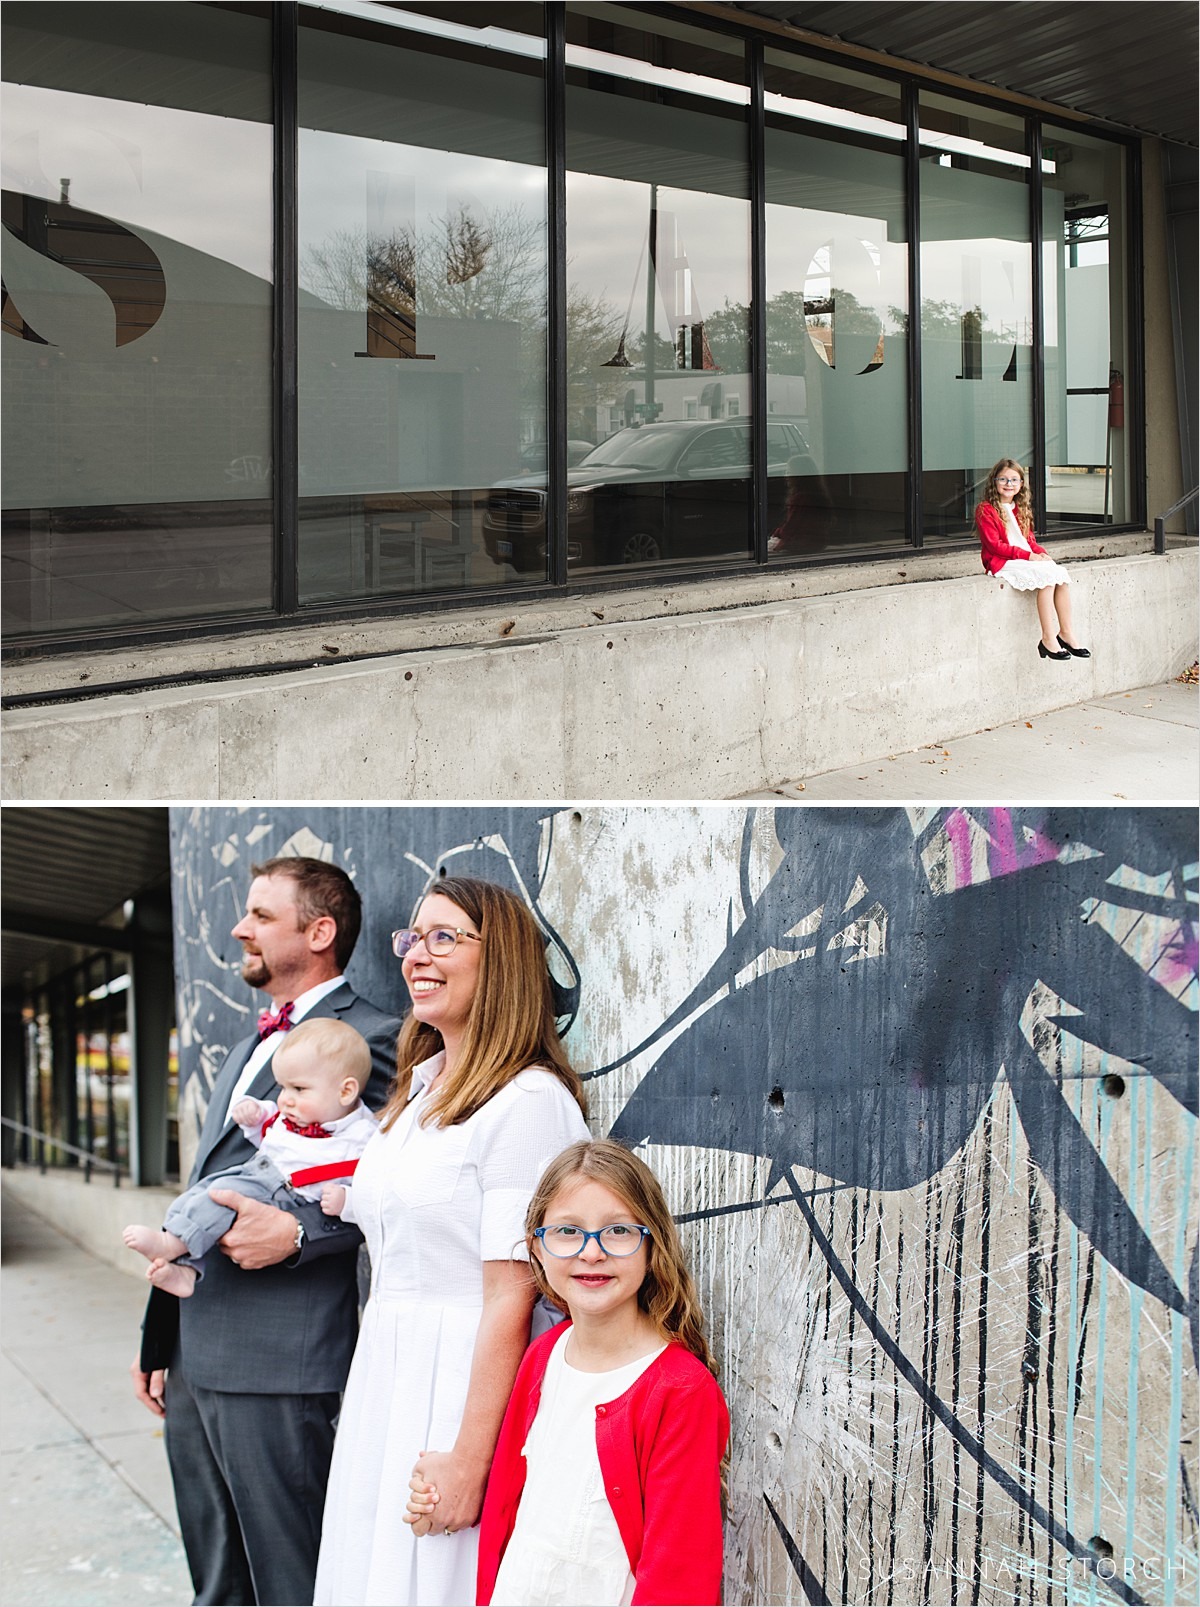 Two images of urban family photography